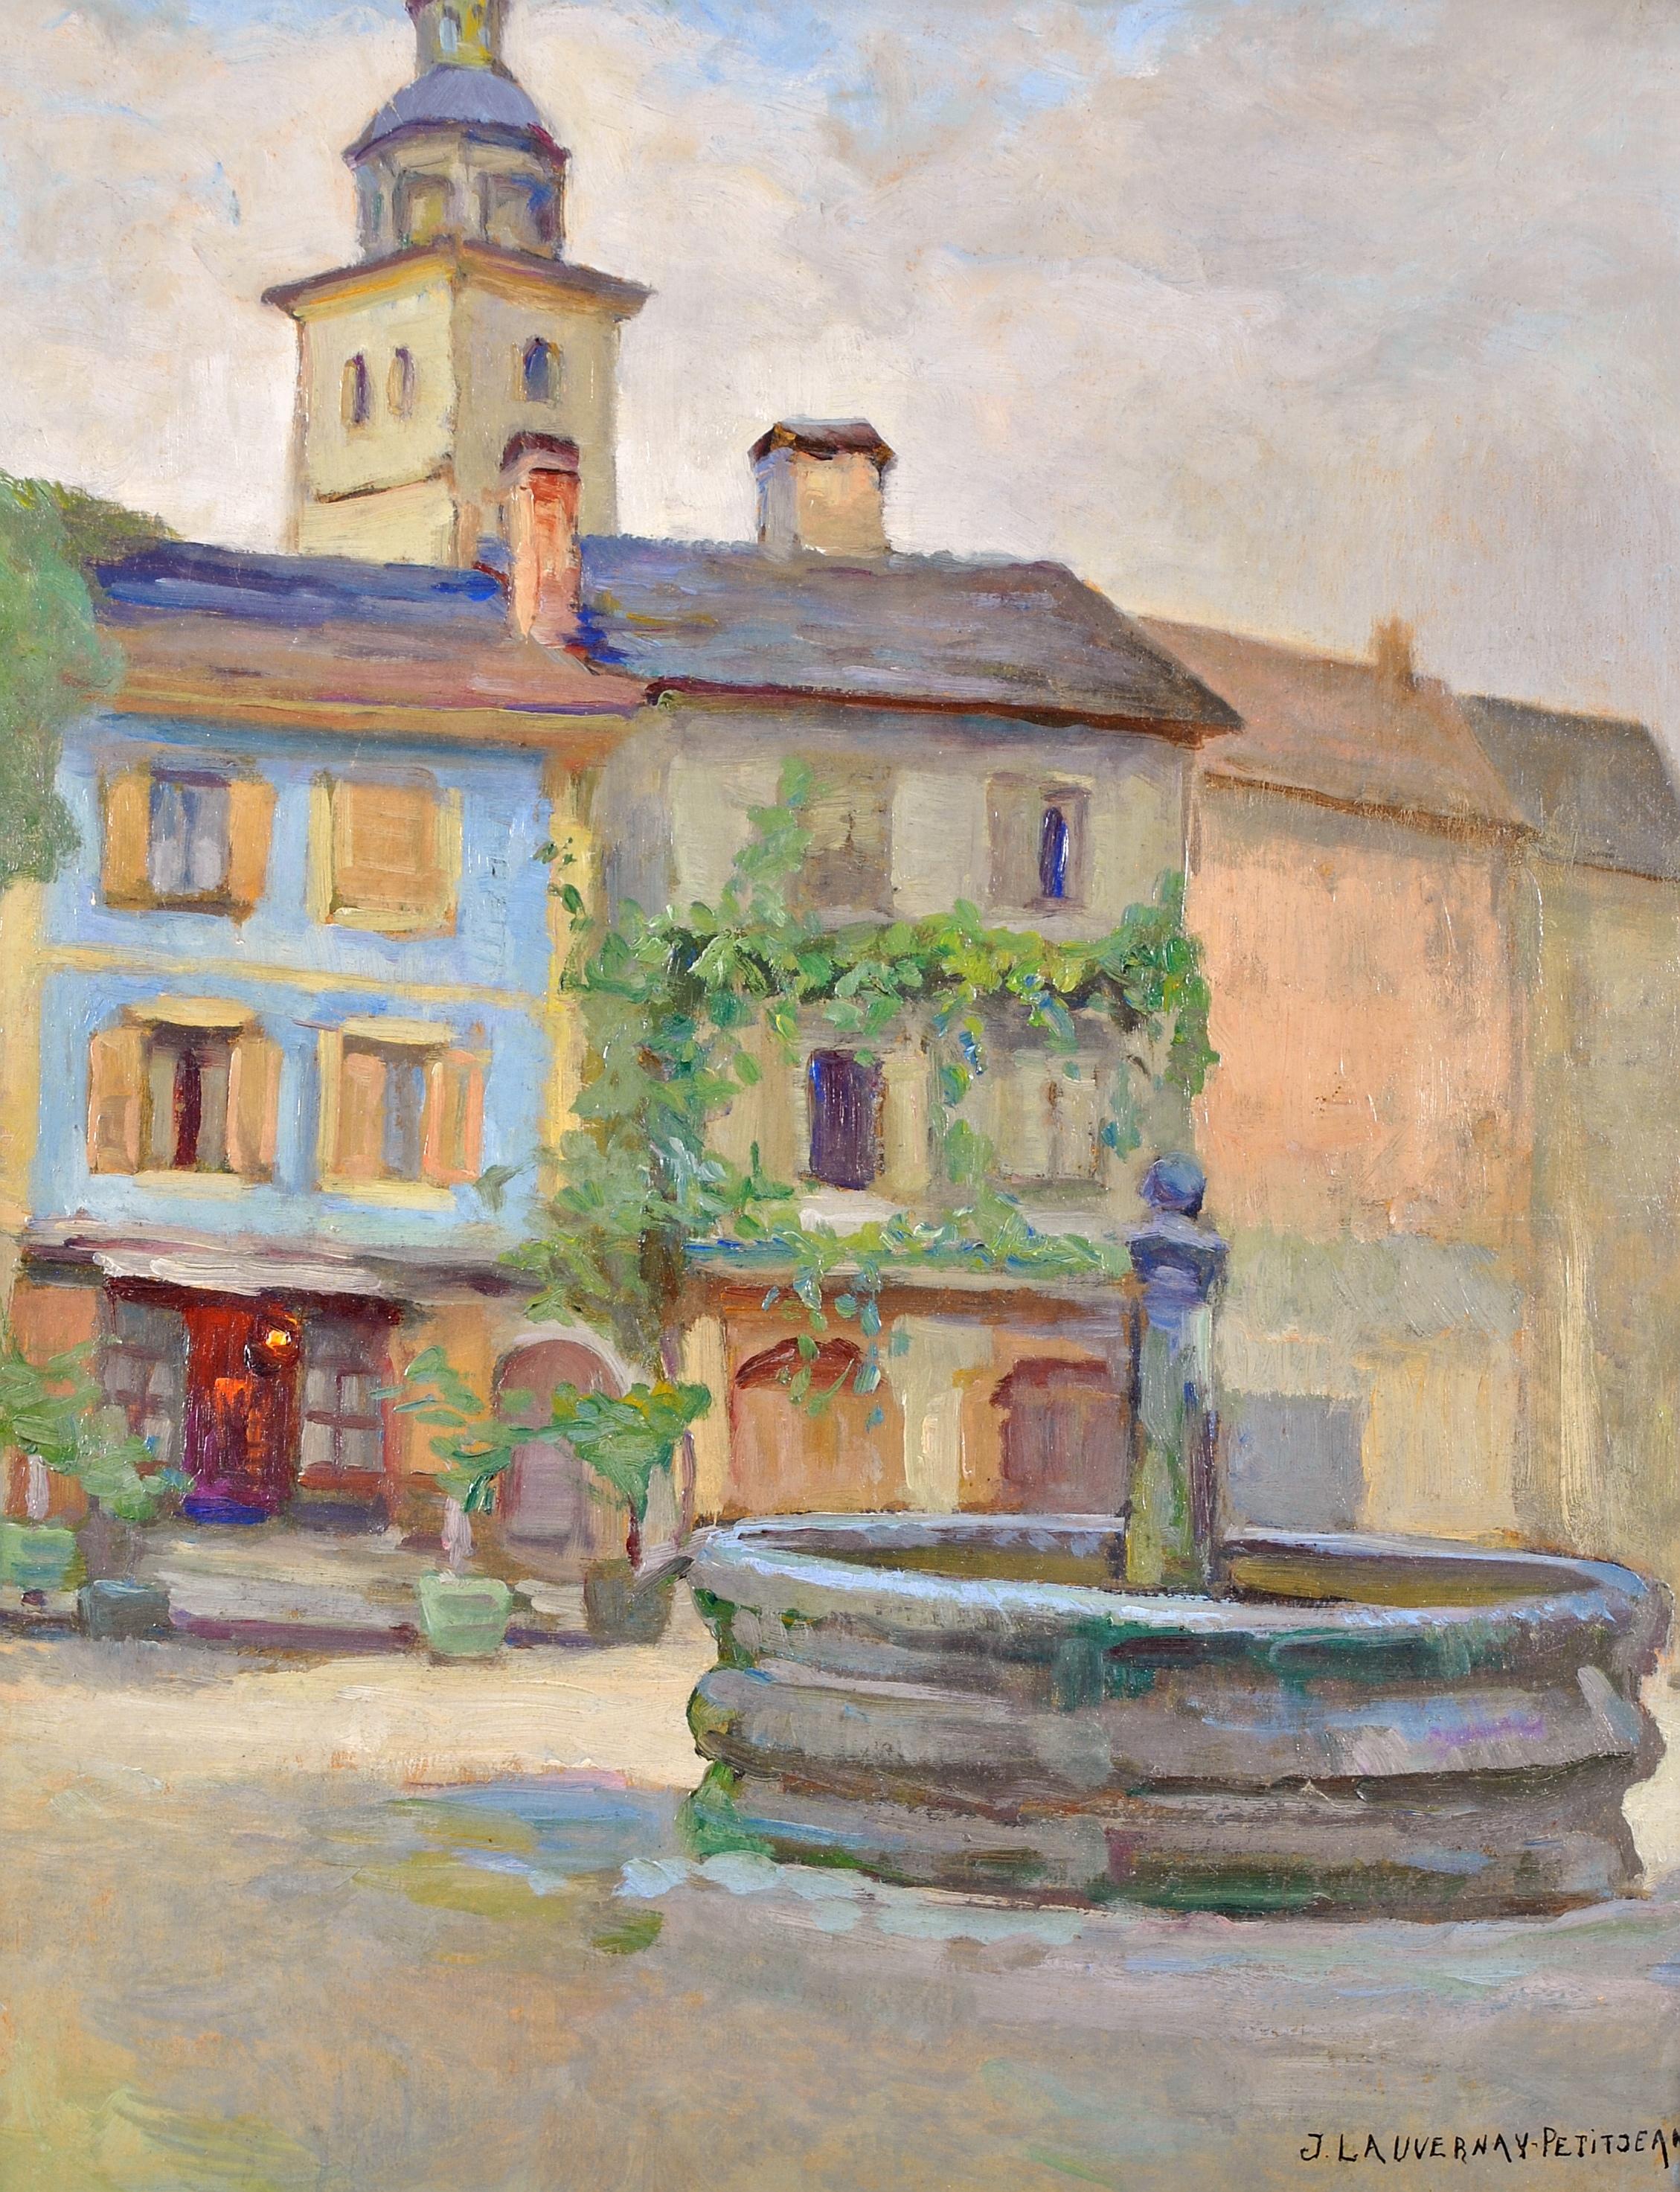 A beautiful 1930's French impressionist oil on board depicting a village water well by Jeanne Lauvernay-Pettitjean, the wife of Edmond Marie Pettitjean.

The work is very atmospheric and evocative of rural France. The well sits in front of a row of